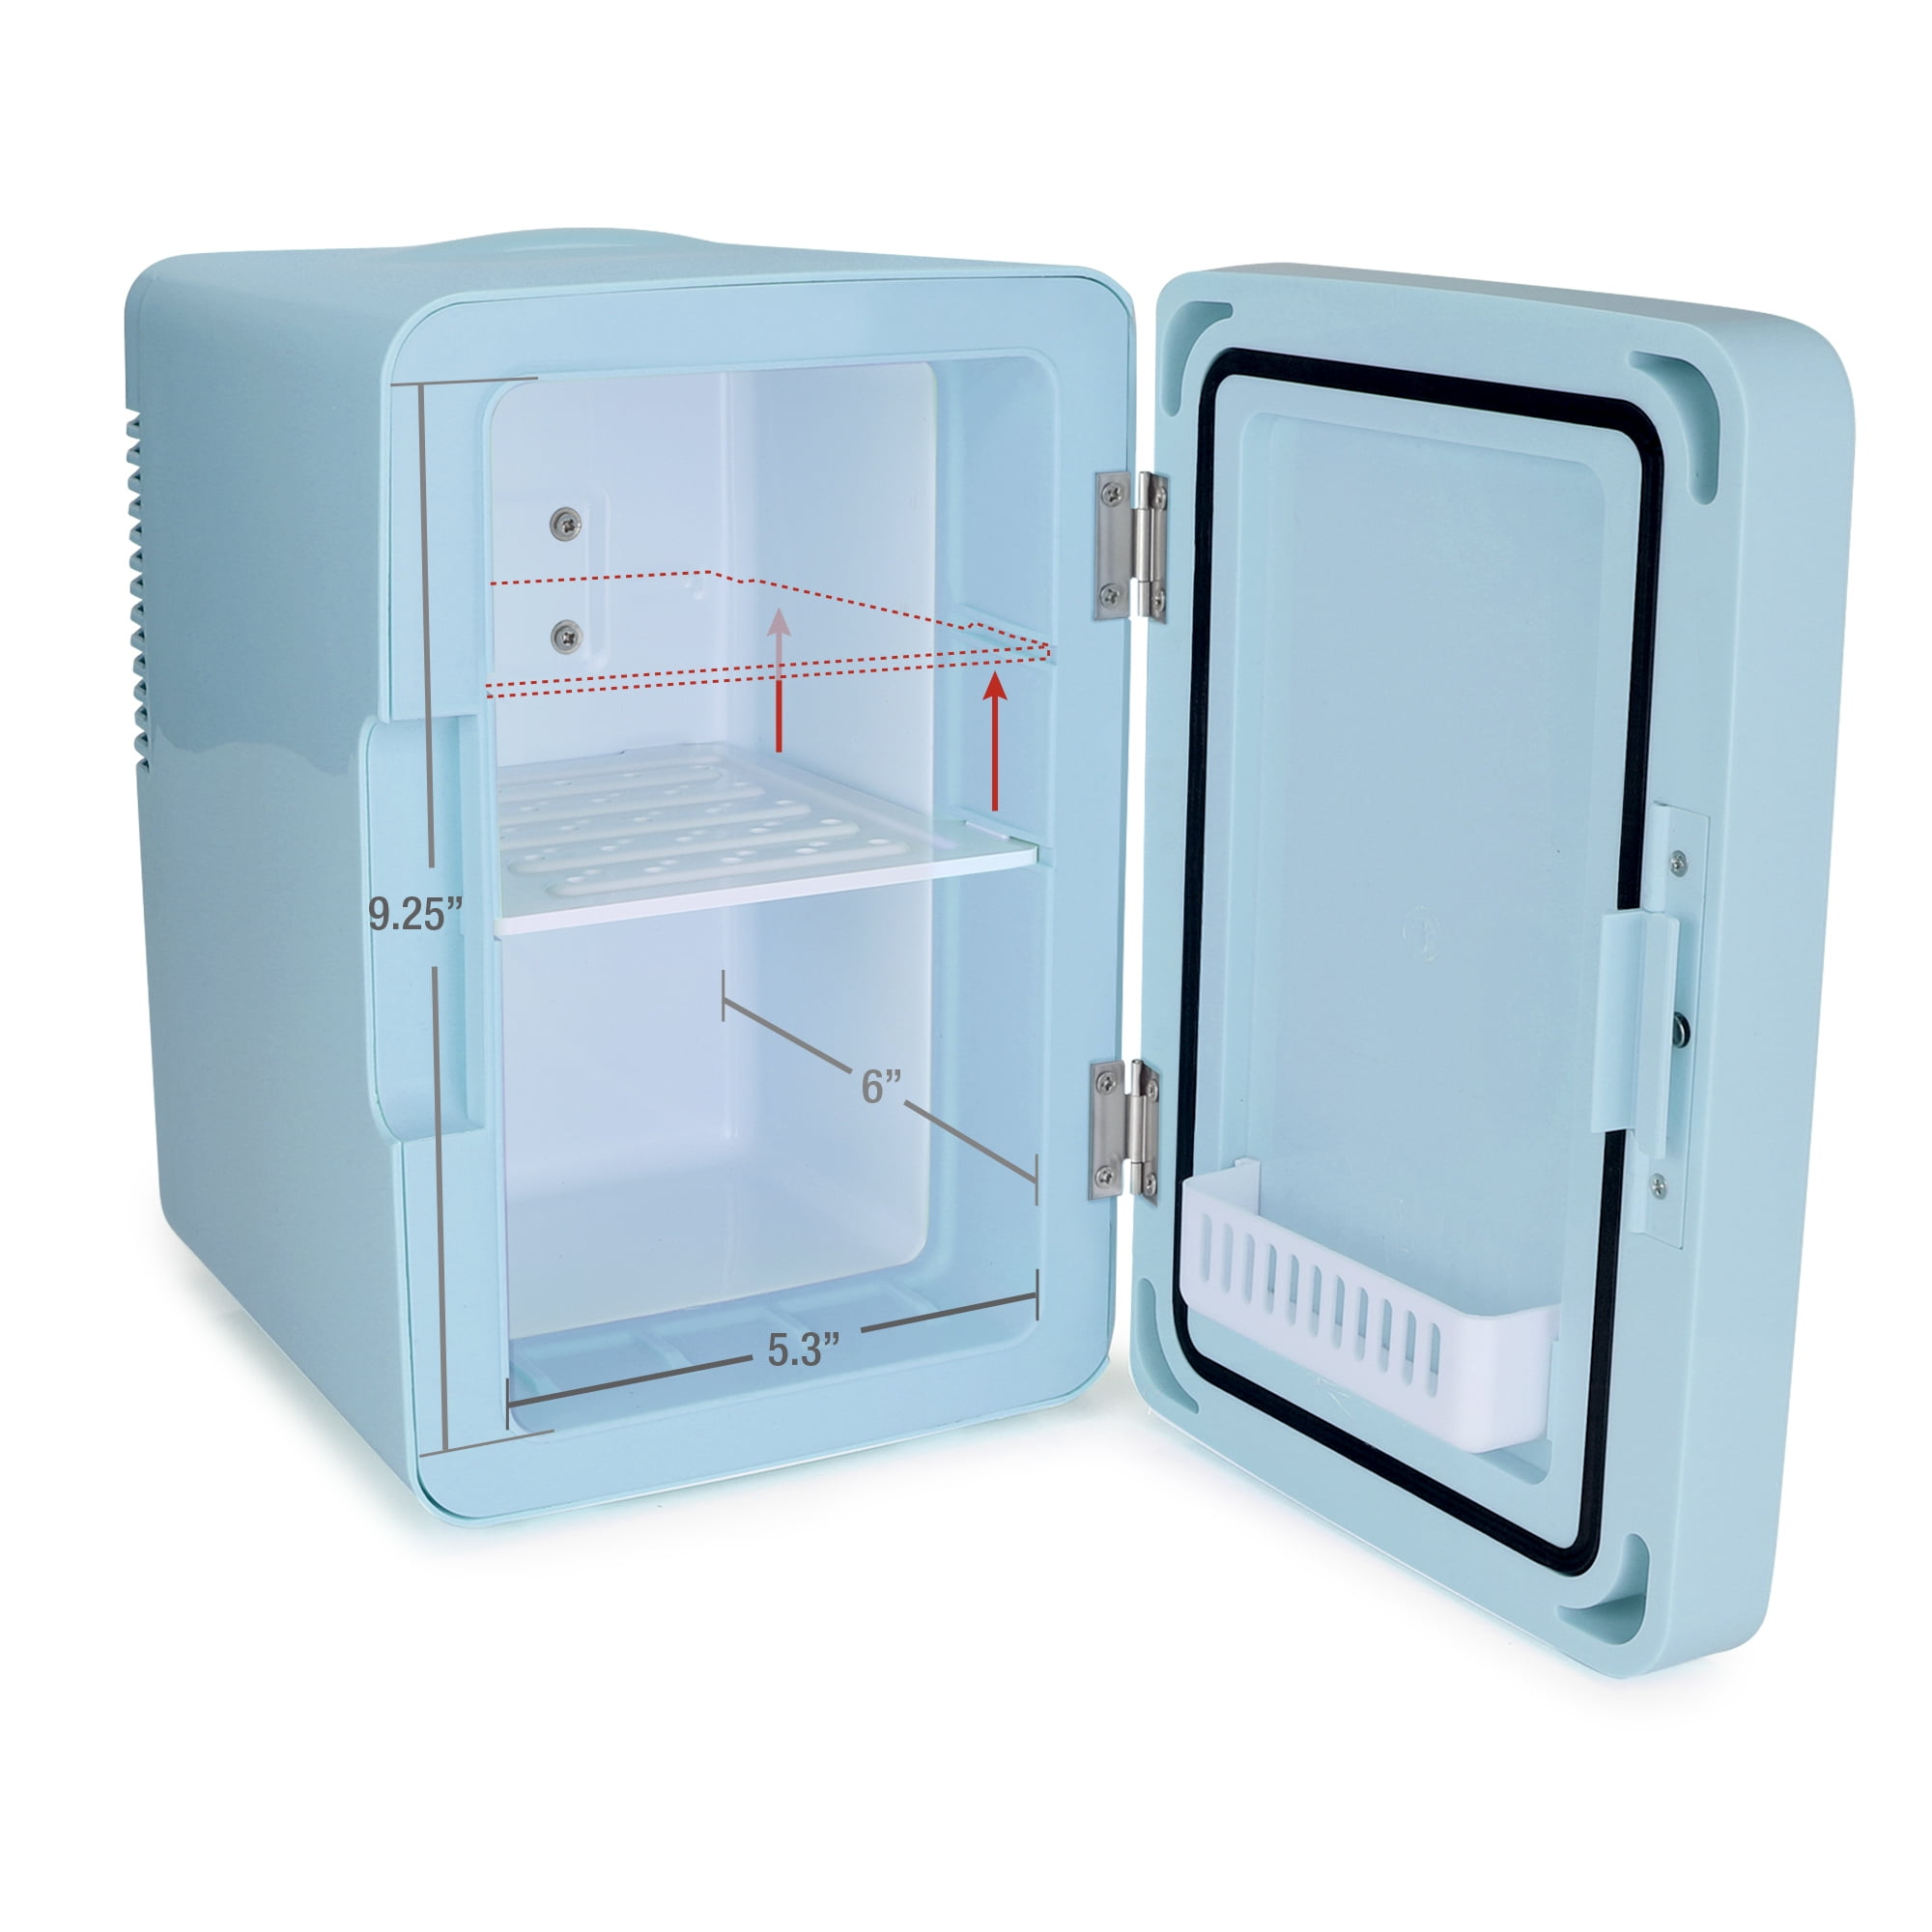 Personal 6 Can Chiller LED Lighted Mini Fridge with Mirror Door, Blue